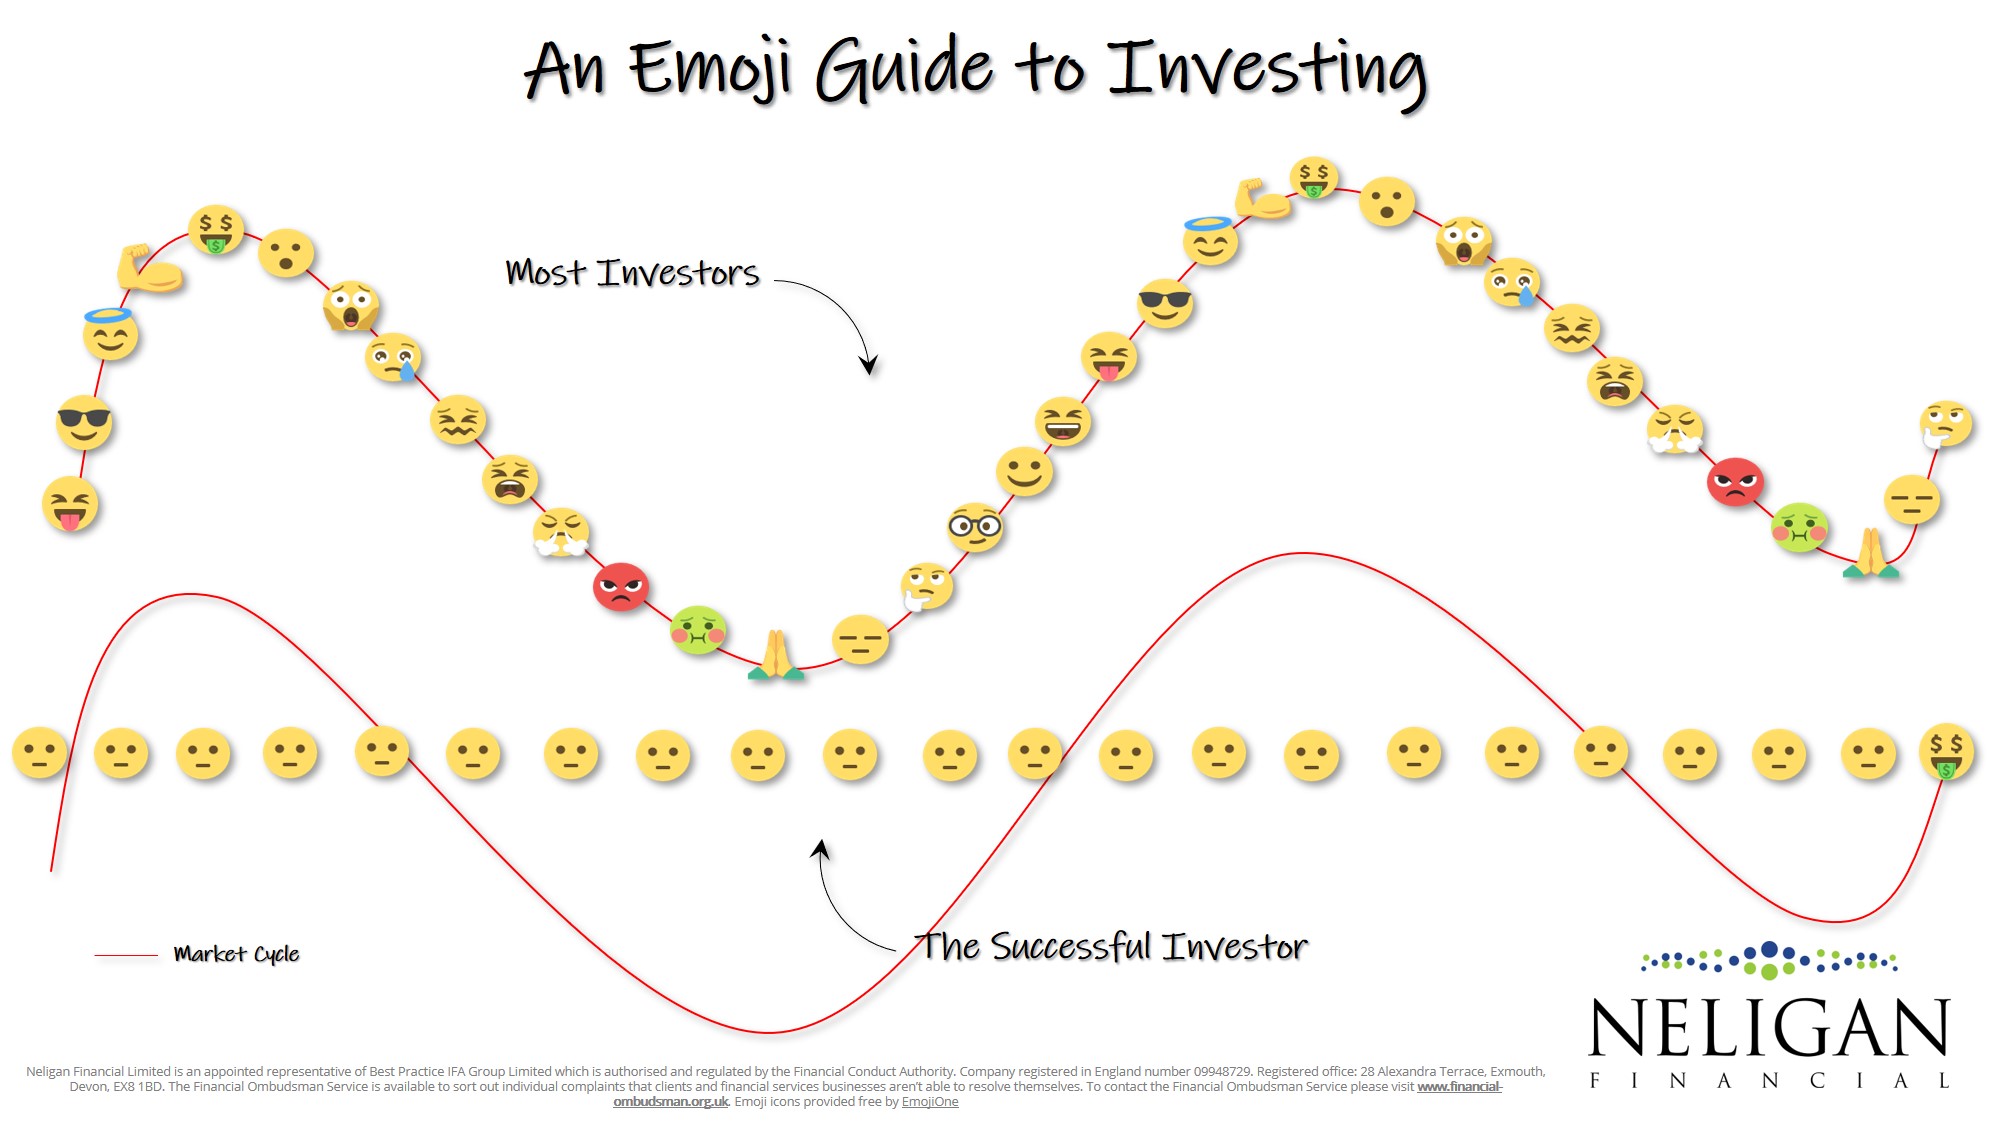 The emoji guide to investing